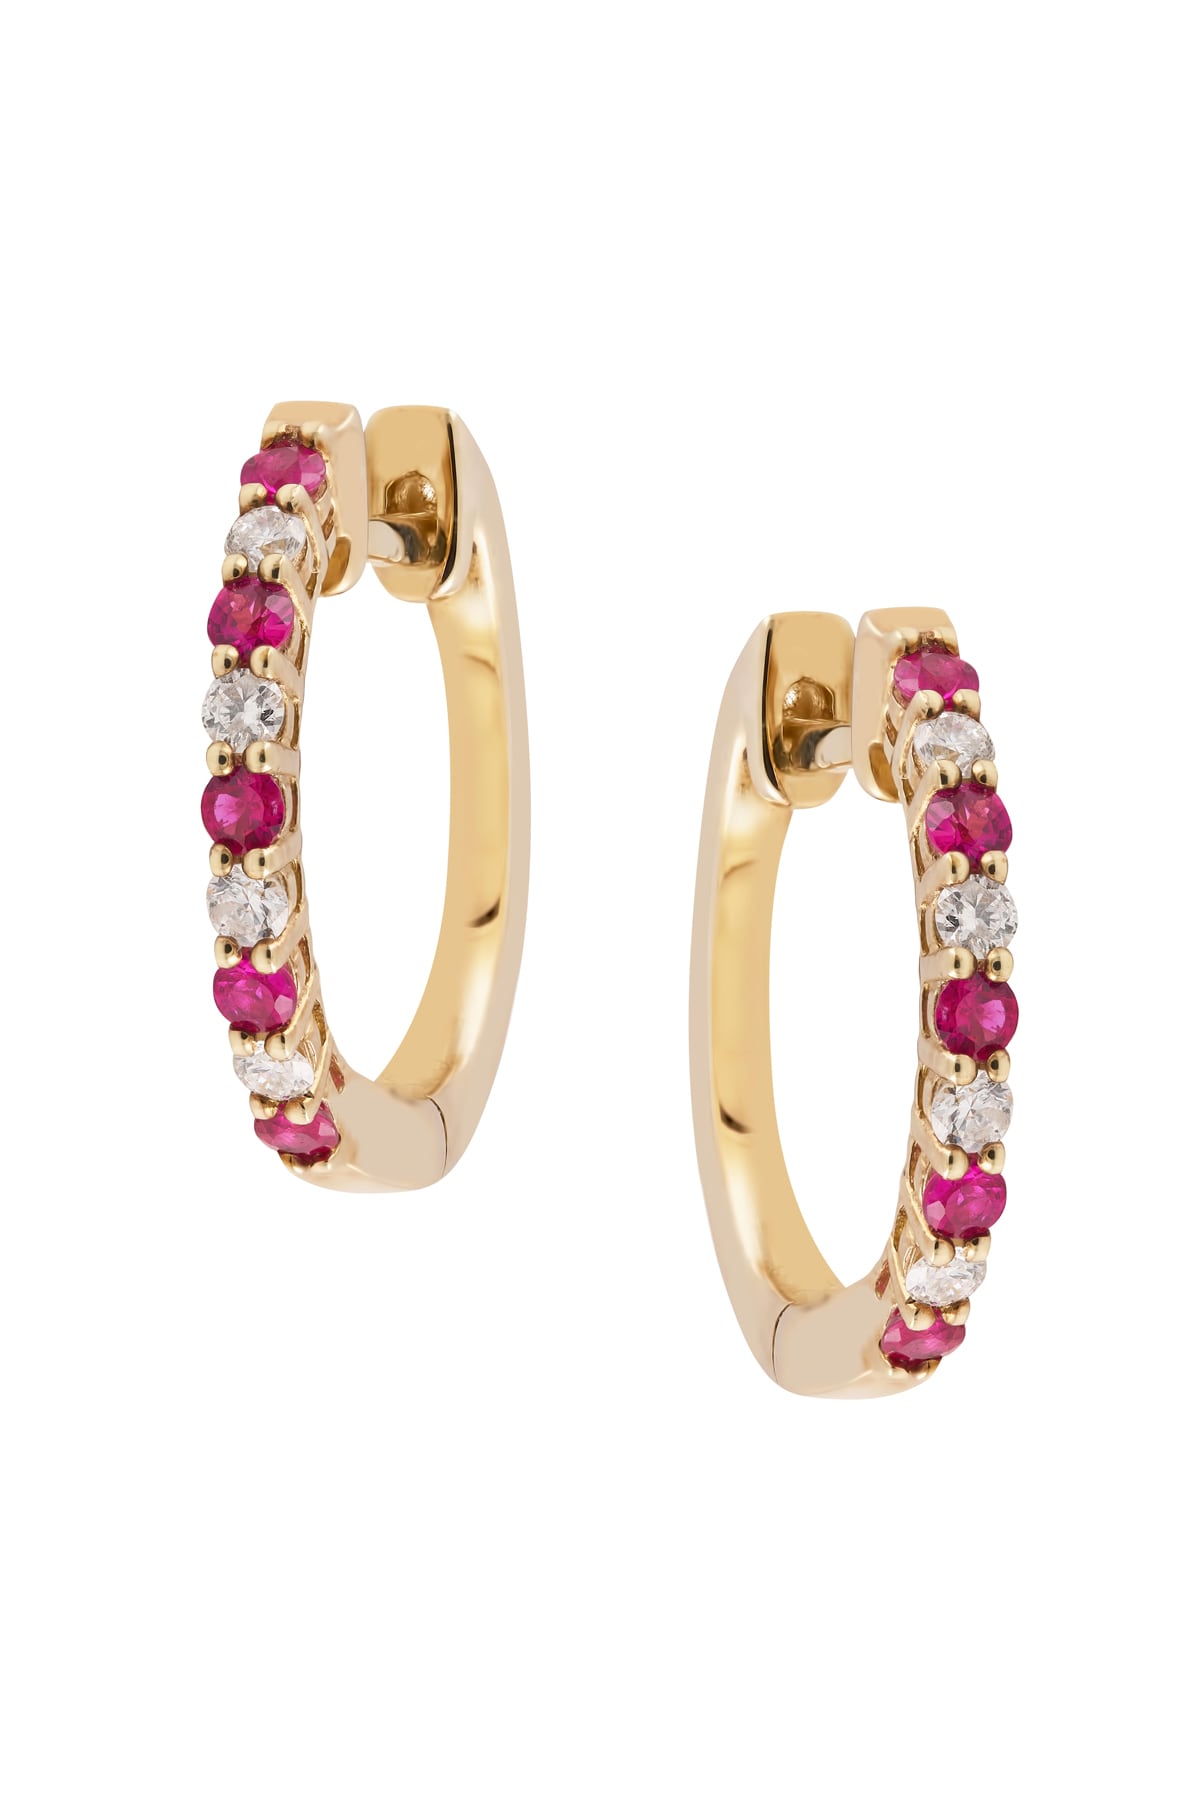 Ruby And Diamond Set Huggie Style Earrings from LeGassick Jewellery.